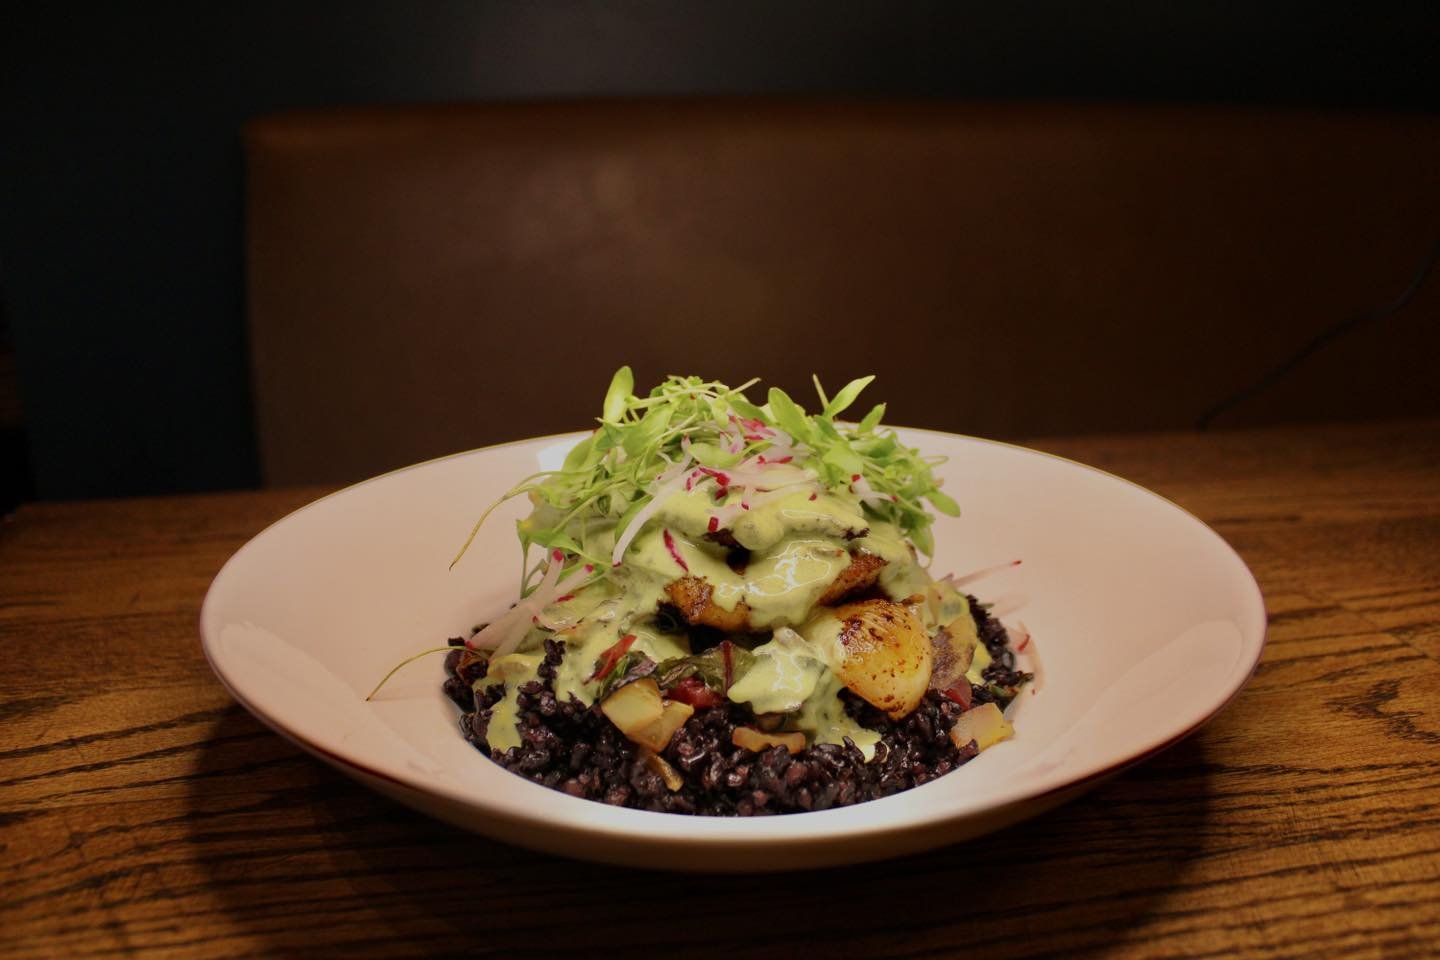 Calling all Bass lovers! Our Blackened Striped Bass has gotten a few upgrades, made with black rice, green tomato, roasted onions, Swiss chard, pickled red onion with a cilantro-lime butter sauce, fresh radish and micro cilantro.